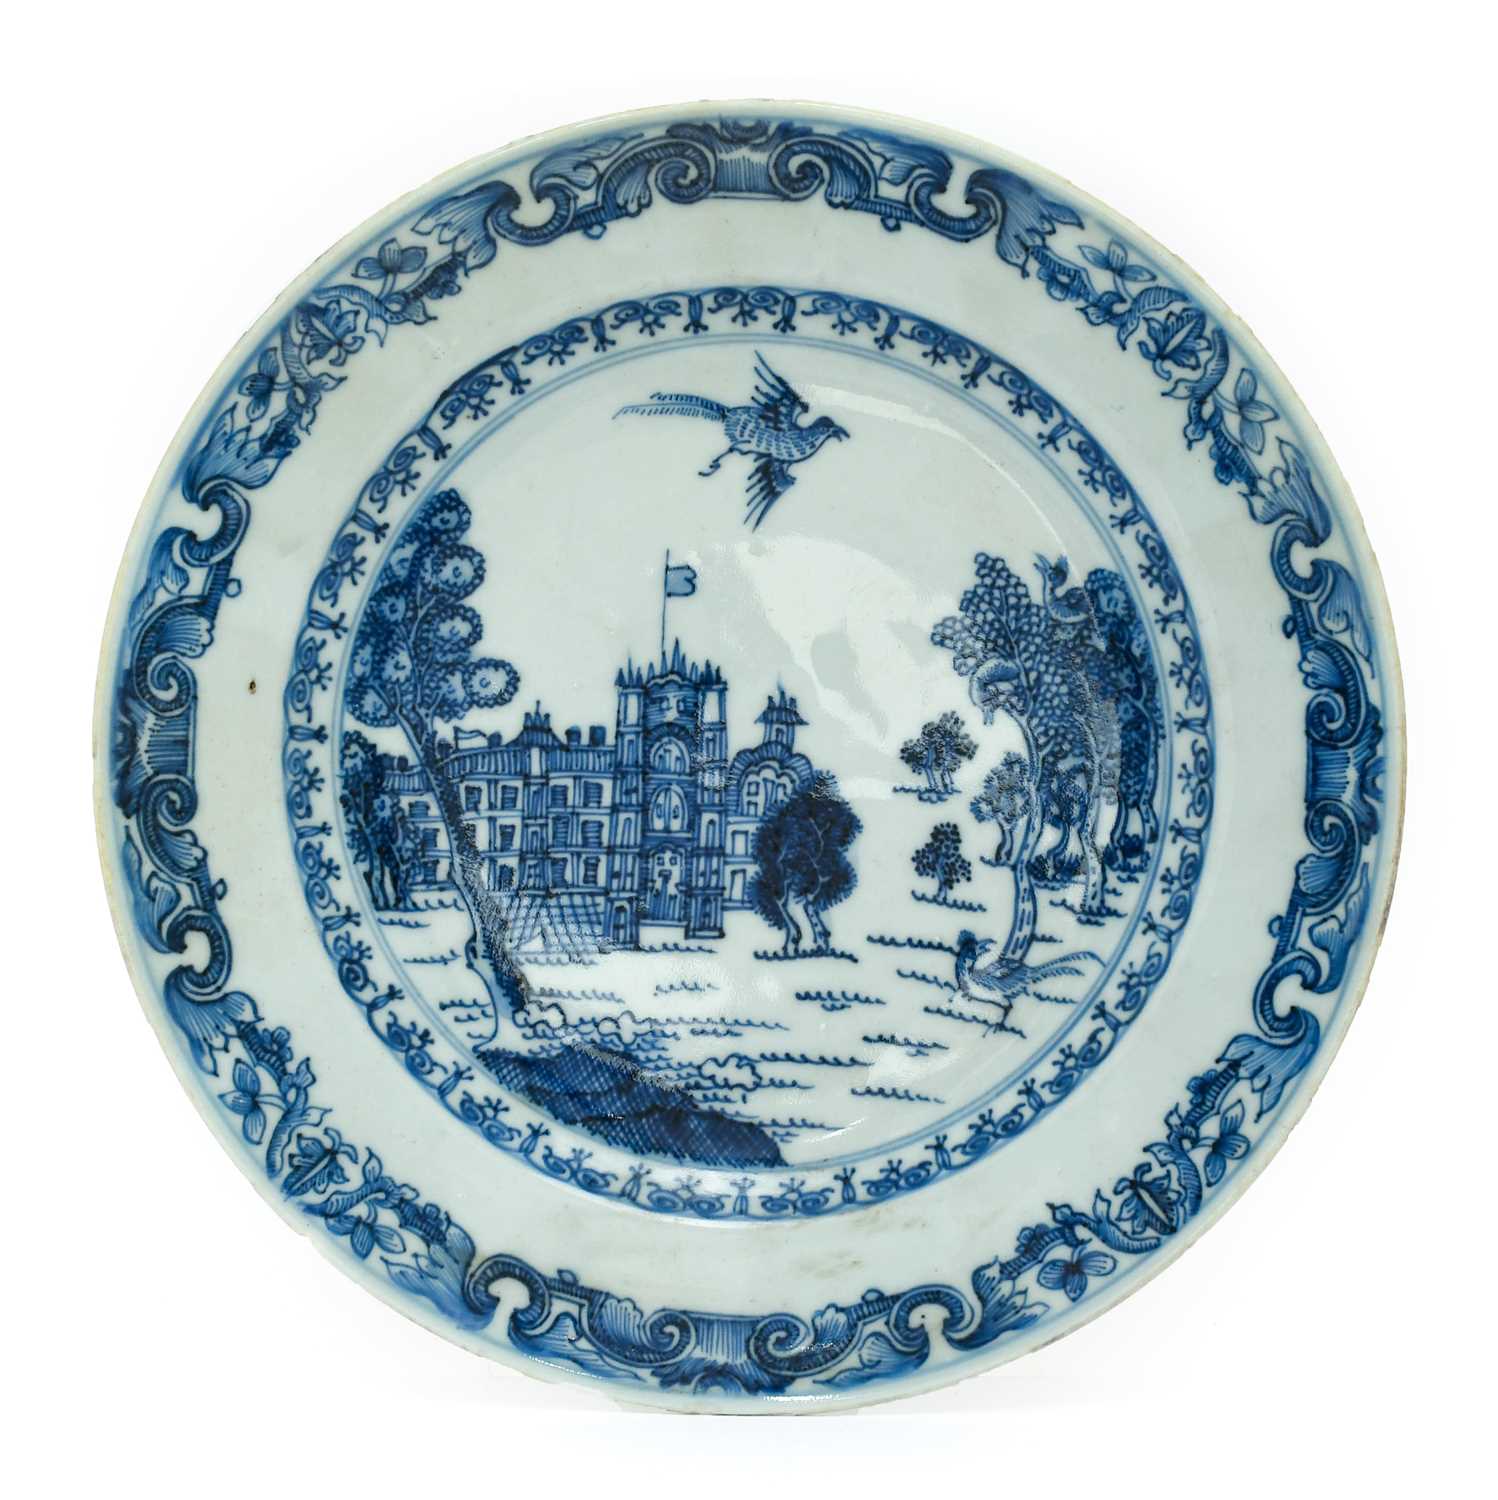 A Chinese Porcelain European Subject Plate, Qianlong, painted in underglaze blue with a palace in